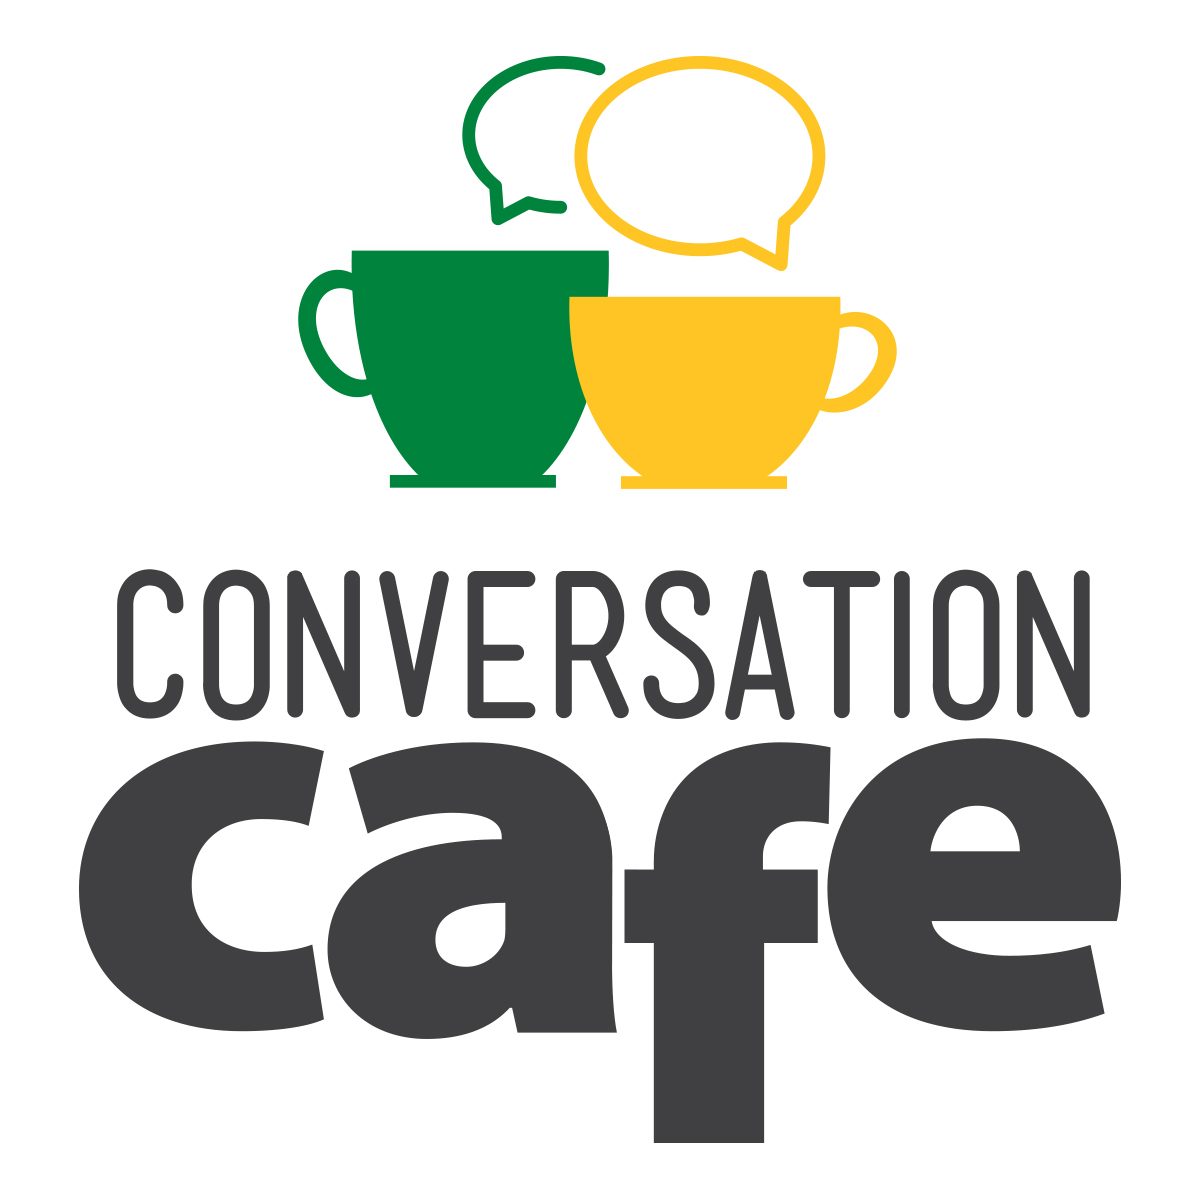 Clipart picture of 2 mugs with handles with a word bubble graphic above them and the words "Conversation Cafe" spelled out in large letters.